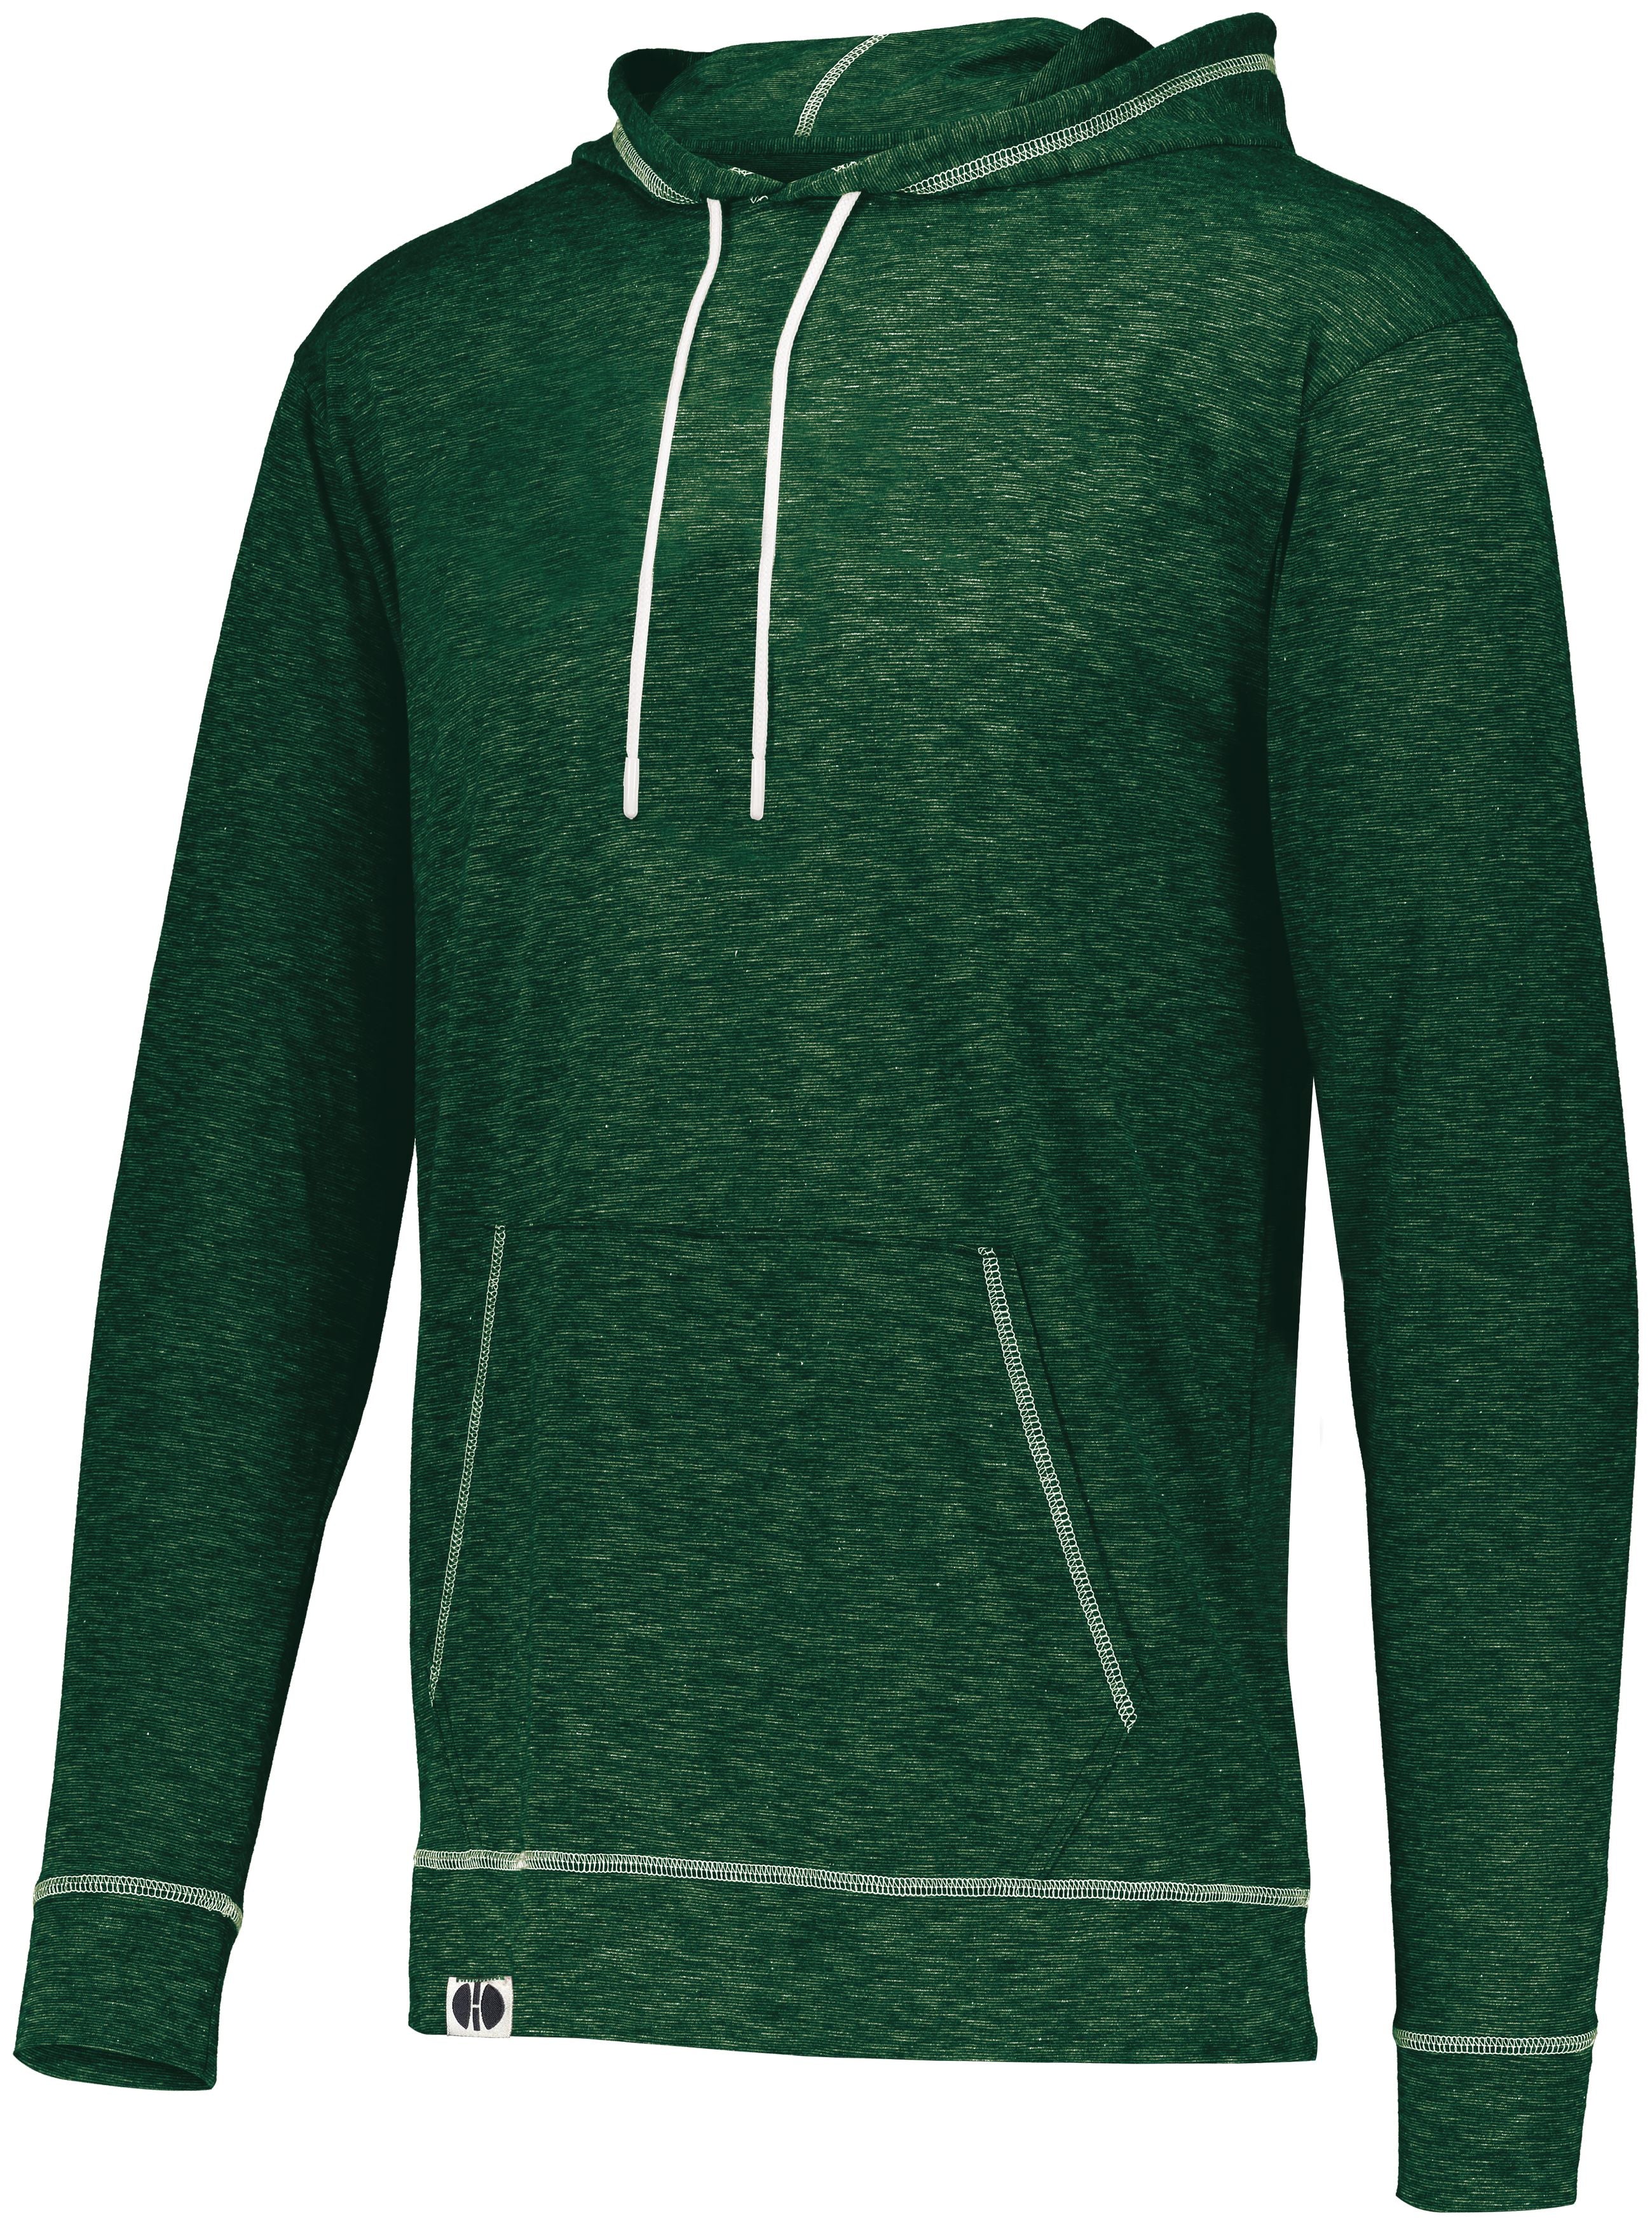 Holloway Journey Hoodie in Dark Green  -Part of the Adult, Adult-Hoodie, Hoodies, Holloway product lines at KanaleyCreations.com